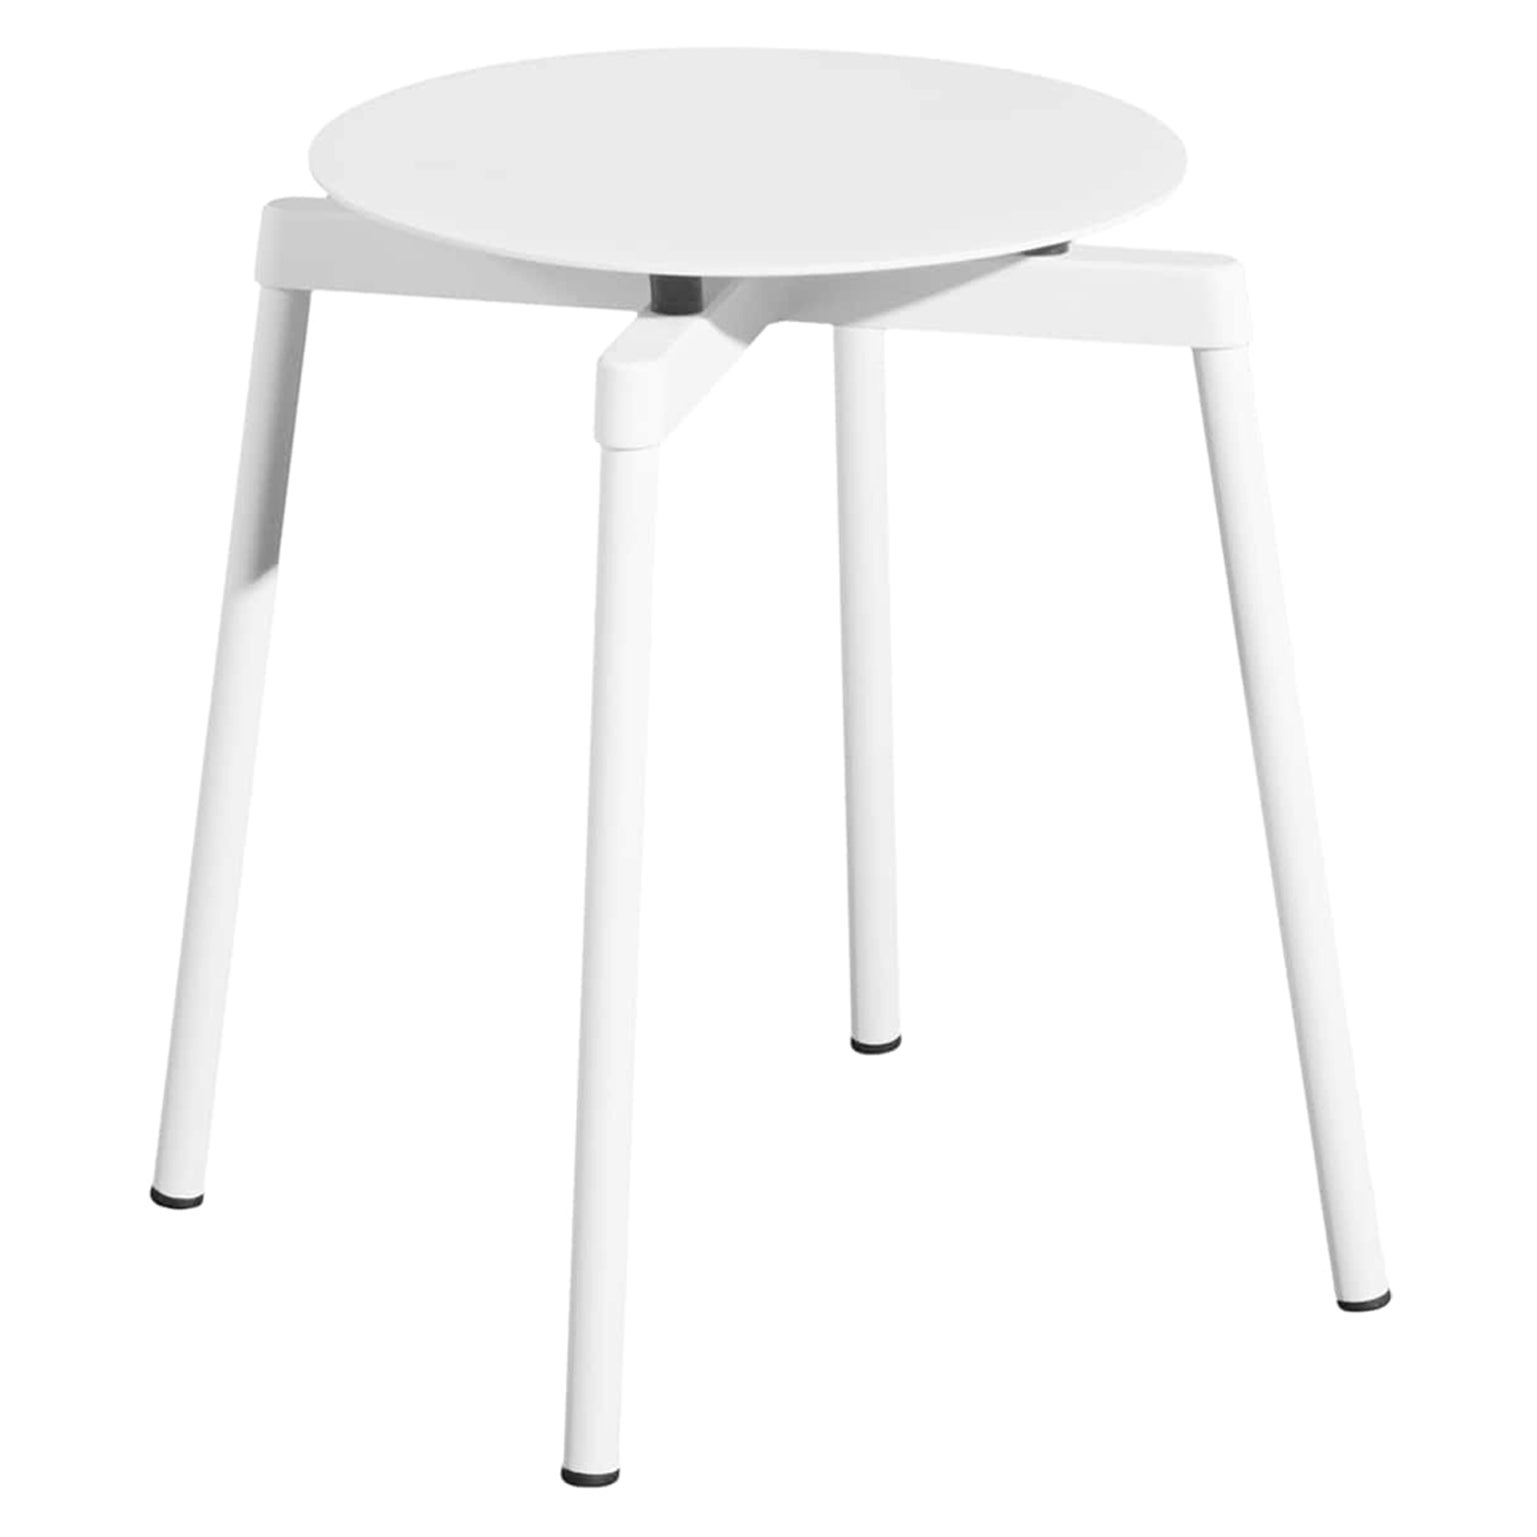 Petite Friture Fromme Stool in White Aluminium by Tom Chung, 2020 For Sale